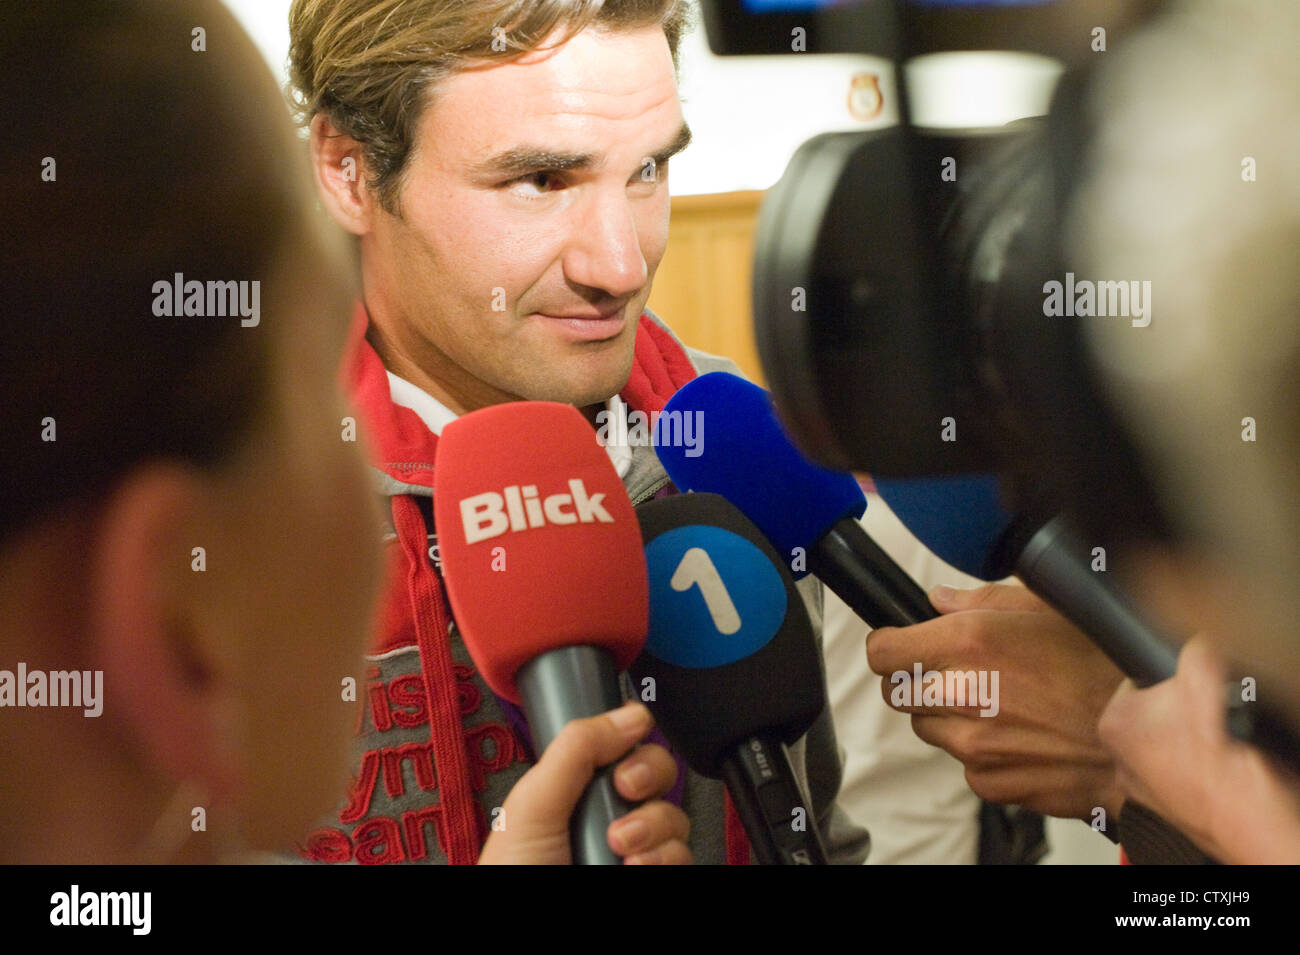 London, August 5, 2012. Tennis player Roger Federer gives a press conference at the Swiss Olympic headquarters Stock Photo